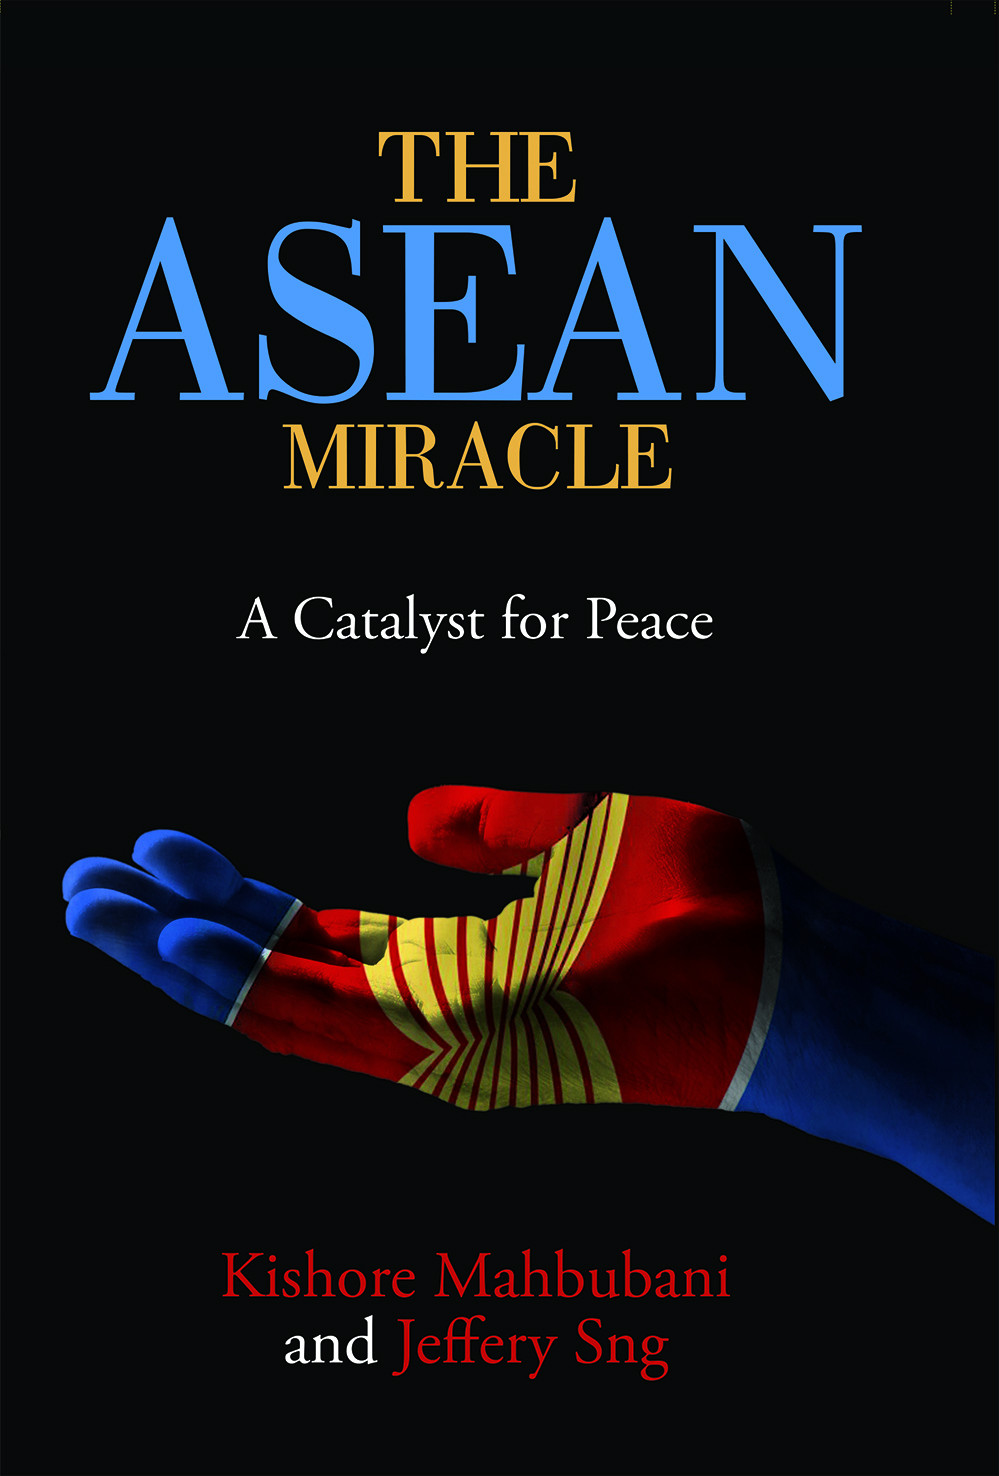 The Asean Miracle